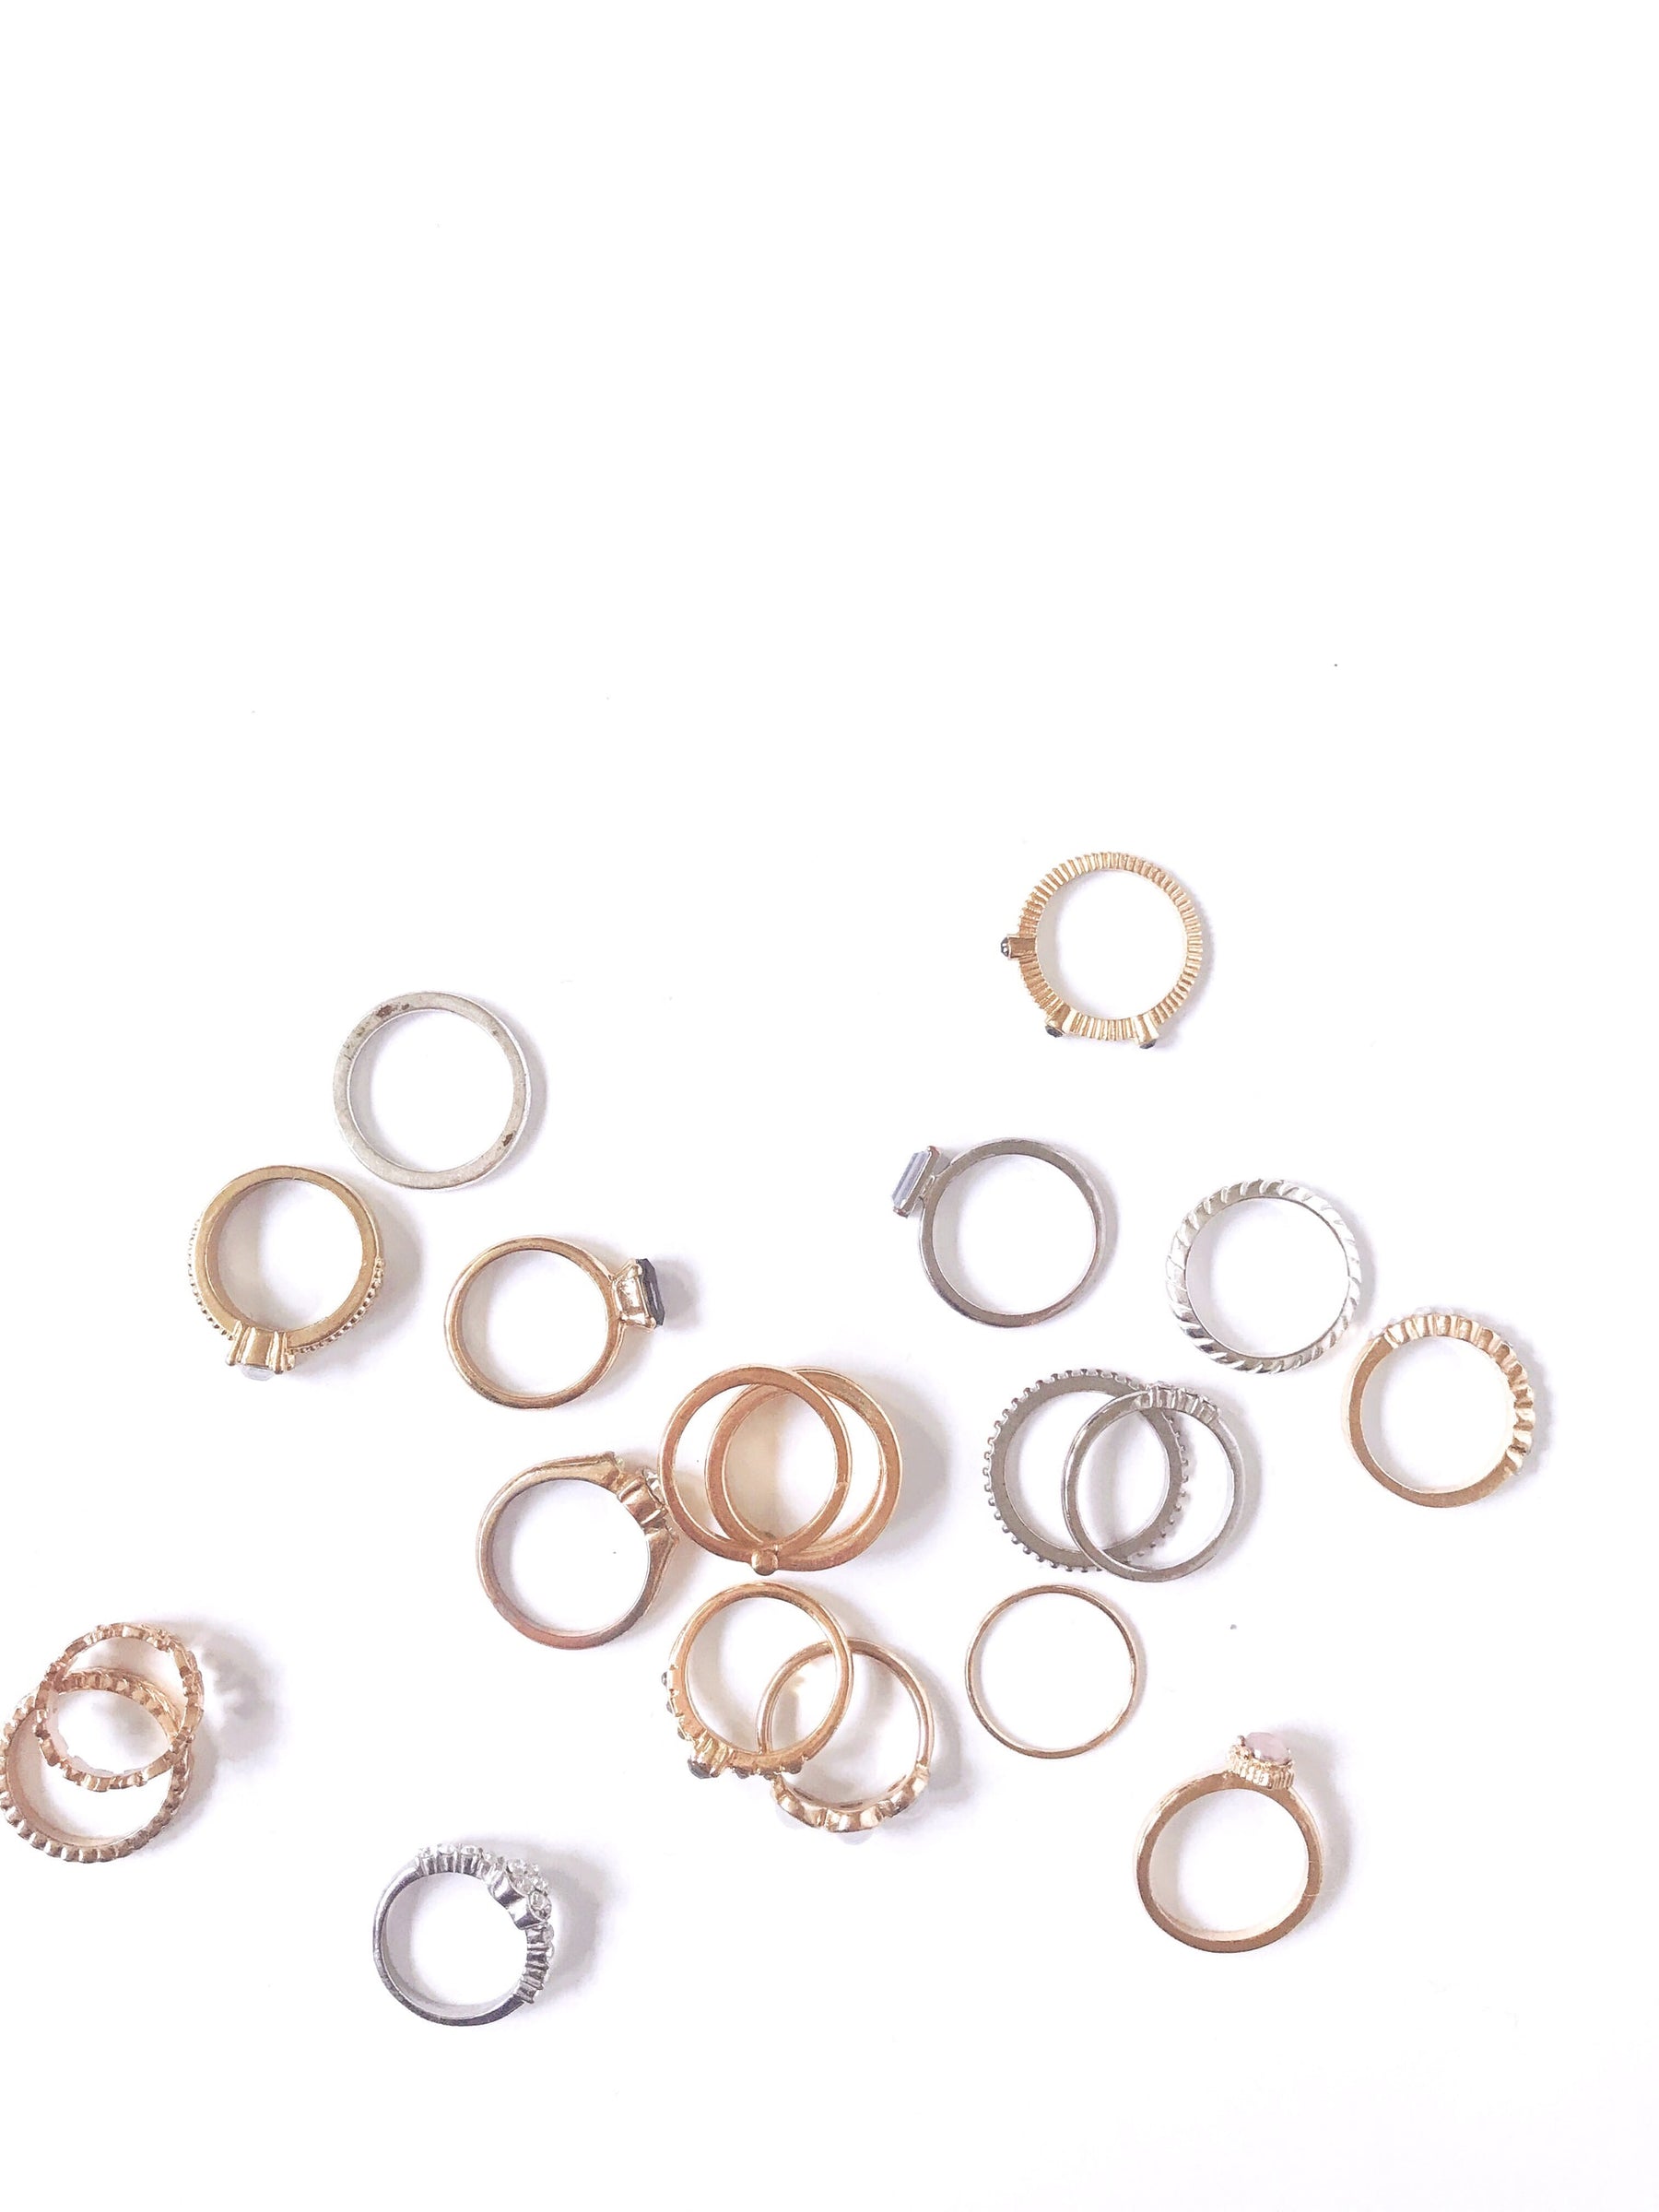 Shop Rings. Shop the Rings Collection in Jewelry from Charm & Lace at charmnlace.com